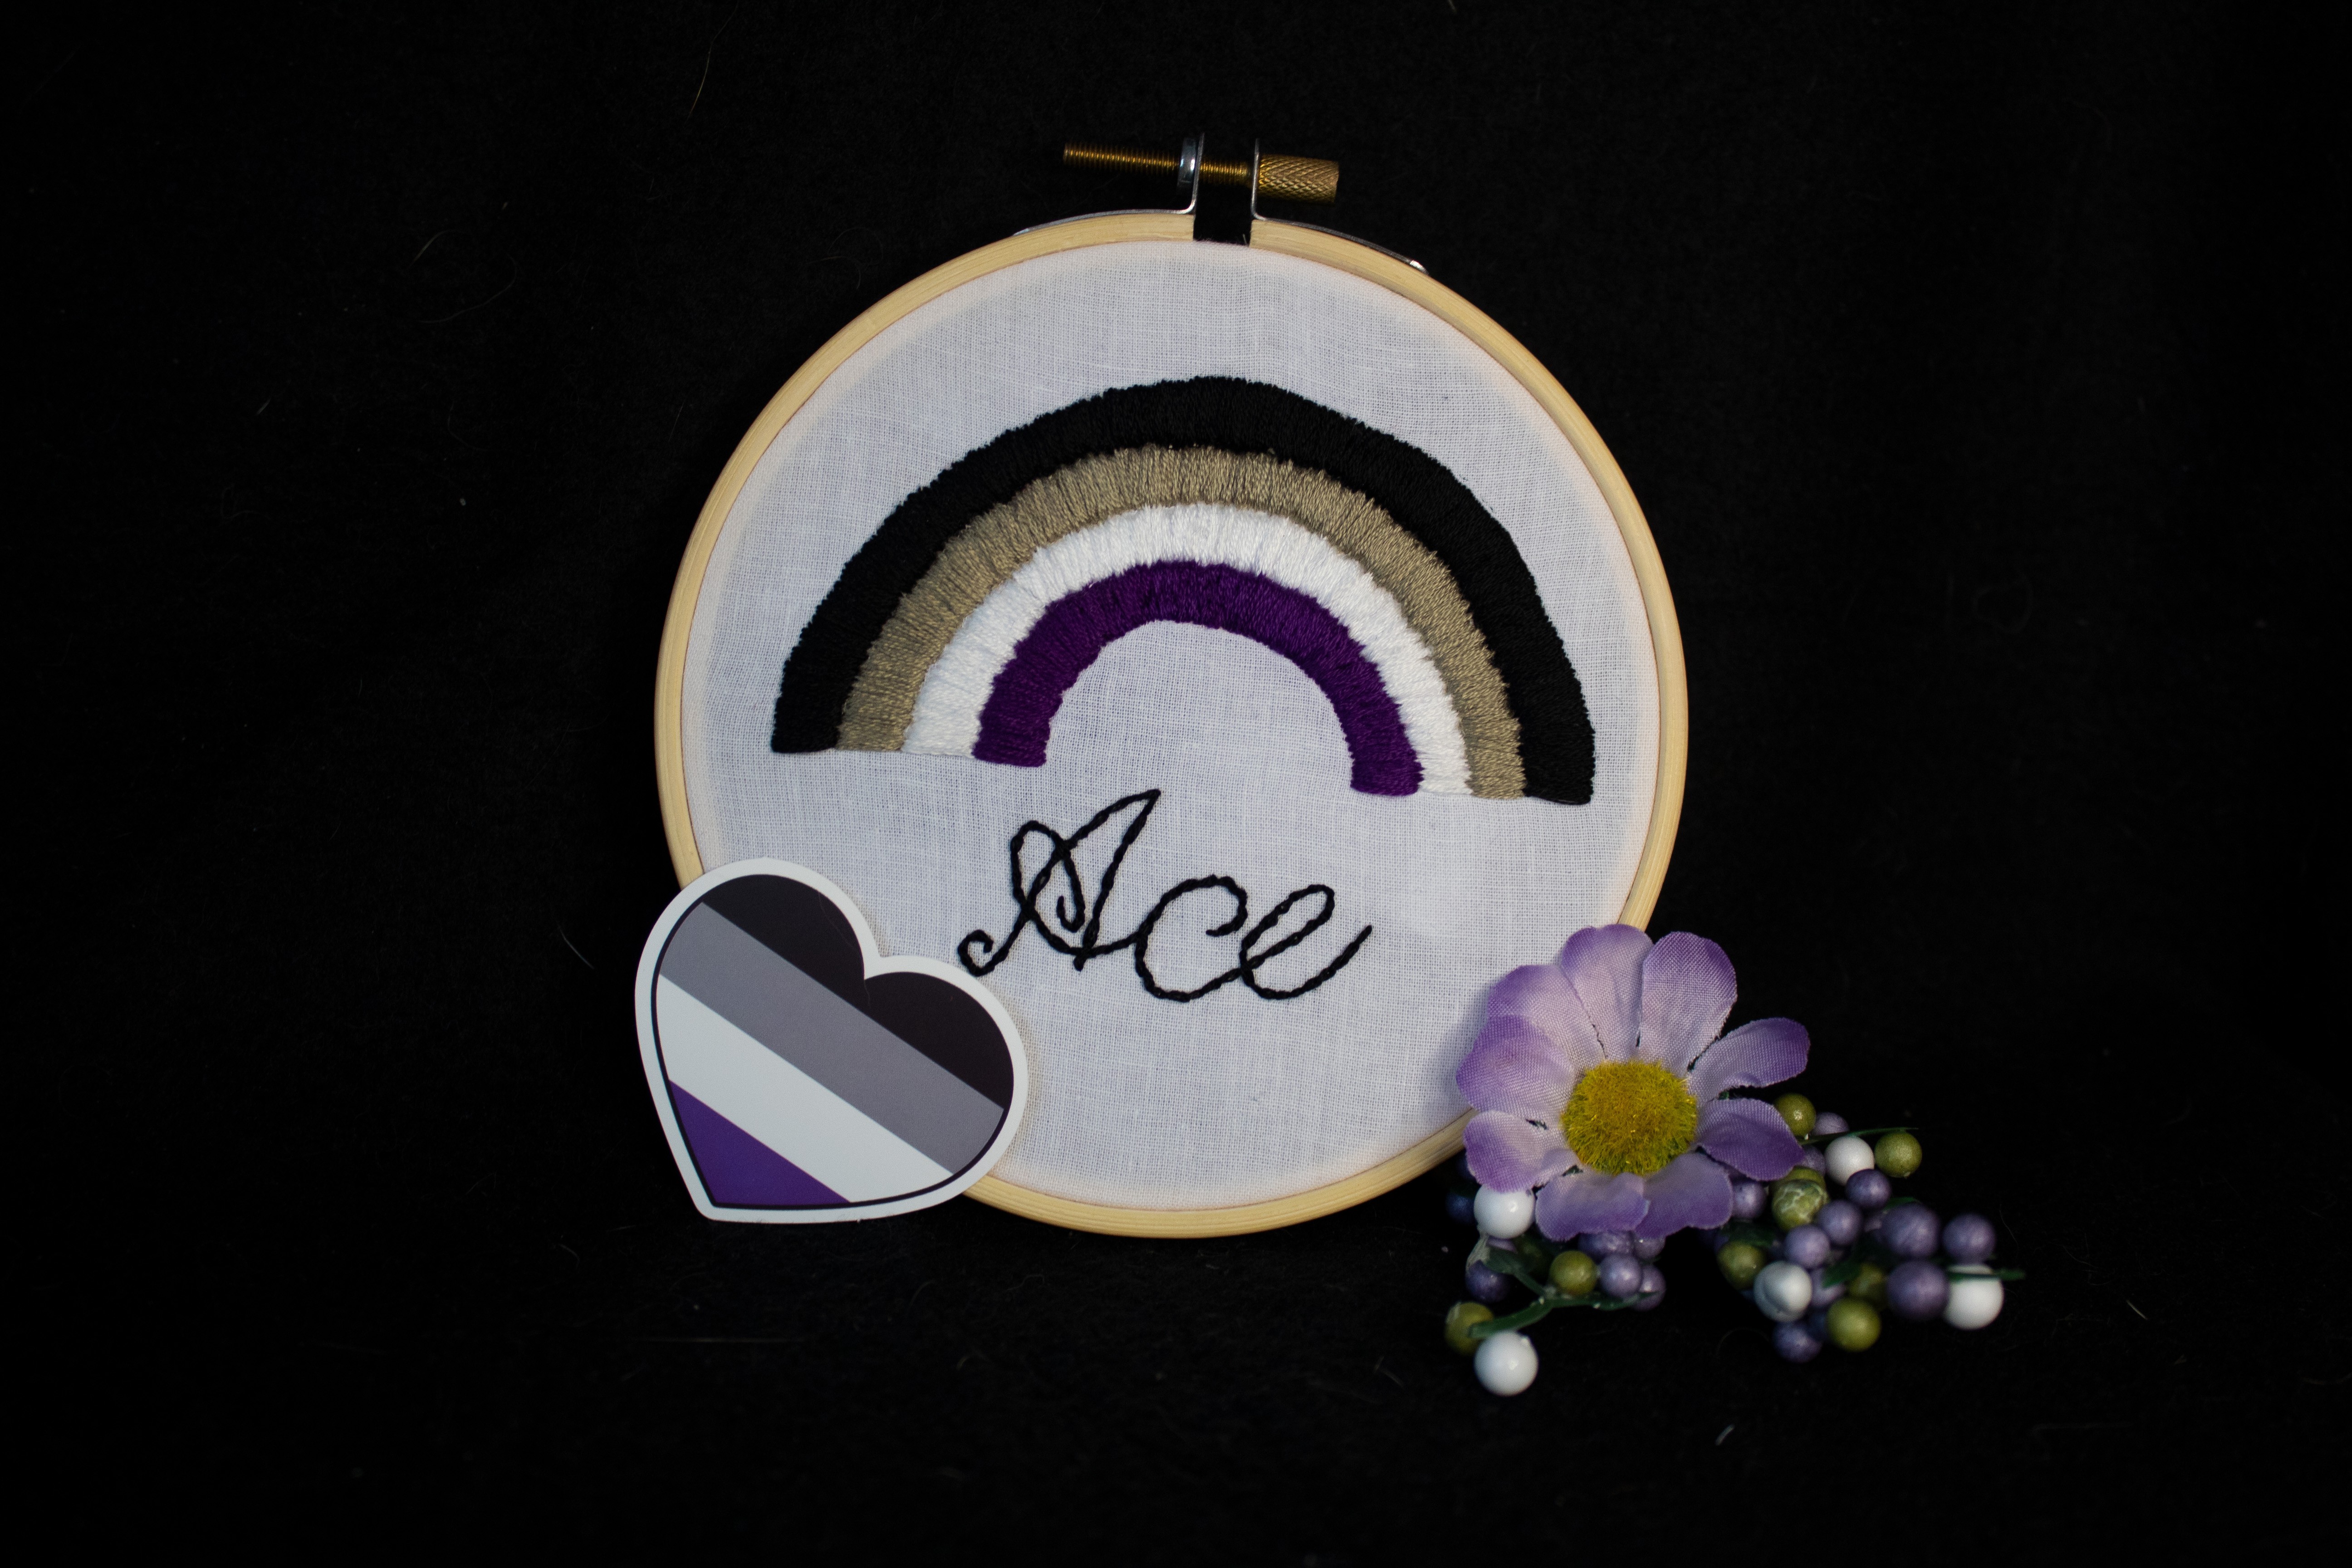 Product image of the ace embroidery set against a black backdrop, with a sprig of purple and green buds and one purple  one one side, and a heart-shaped sticker of the asexual flag on the other side